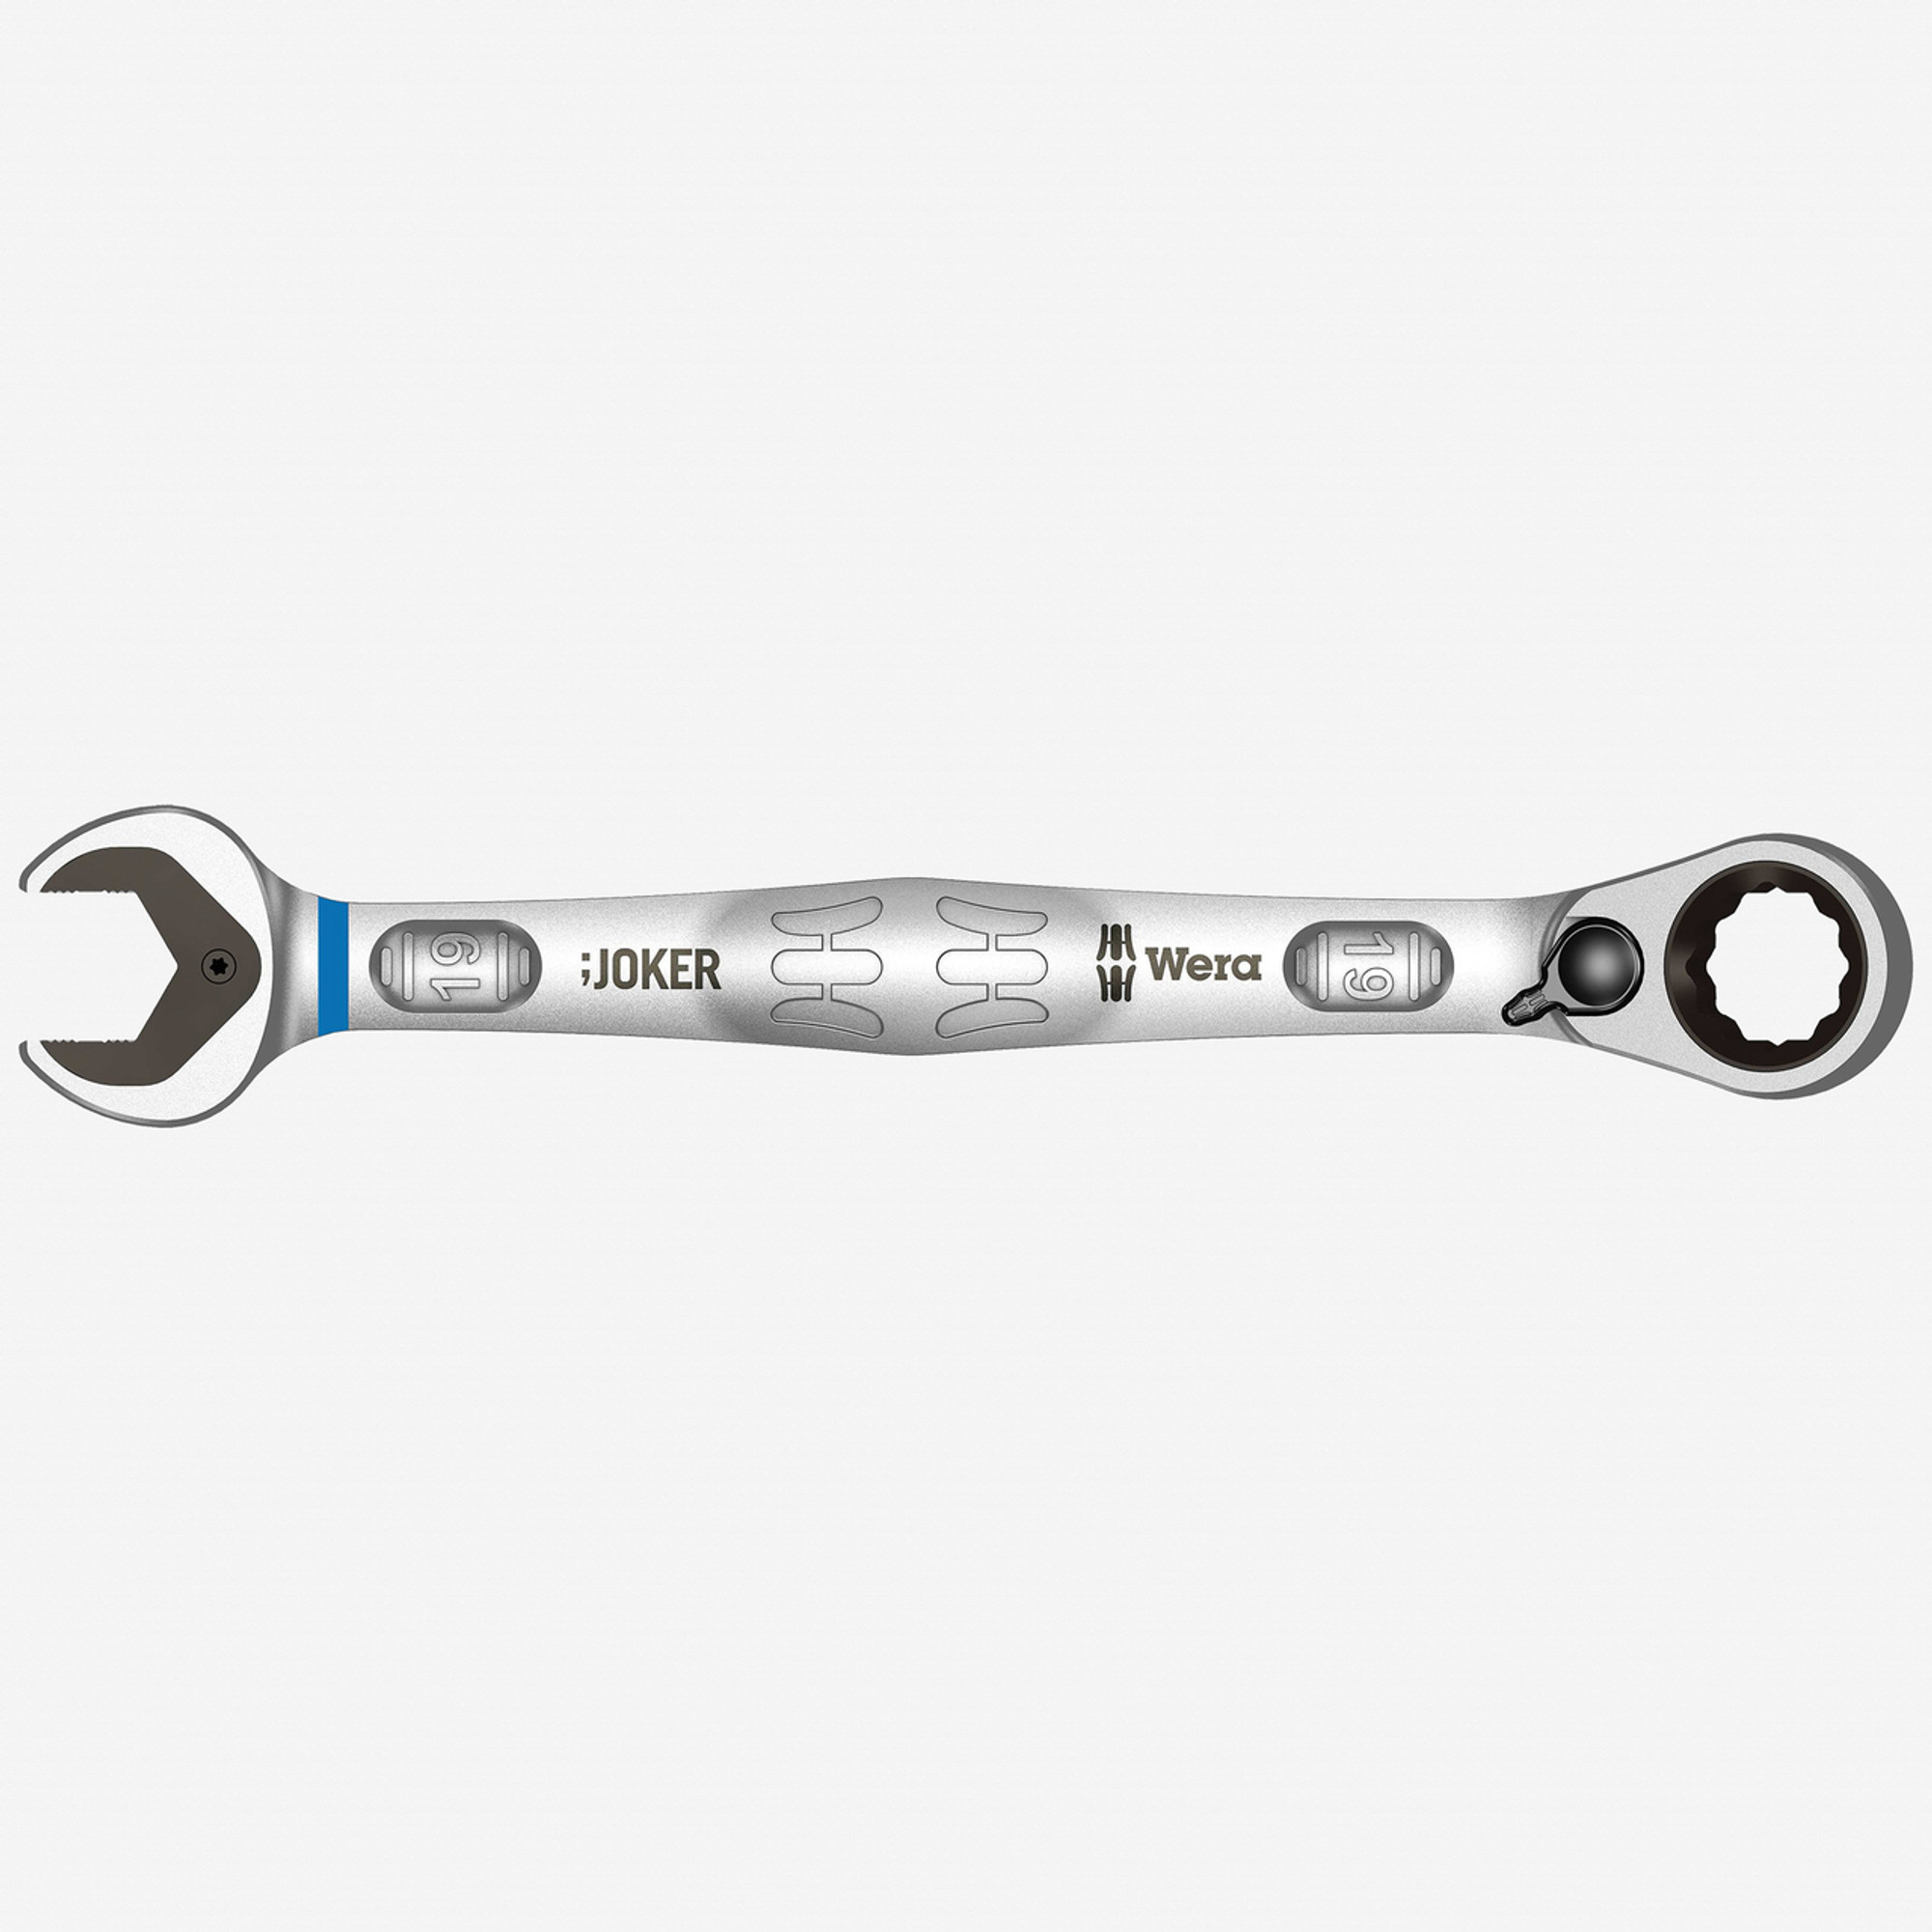 Wera 020074 Joker Combination Wrench with Switch - 19mm